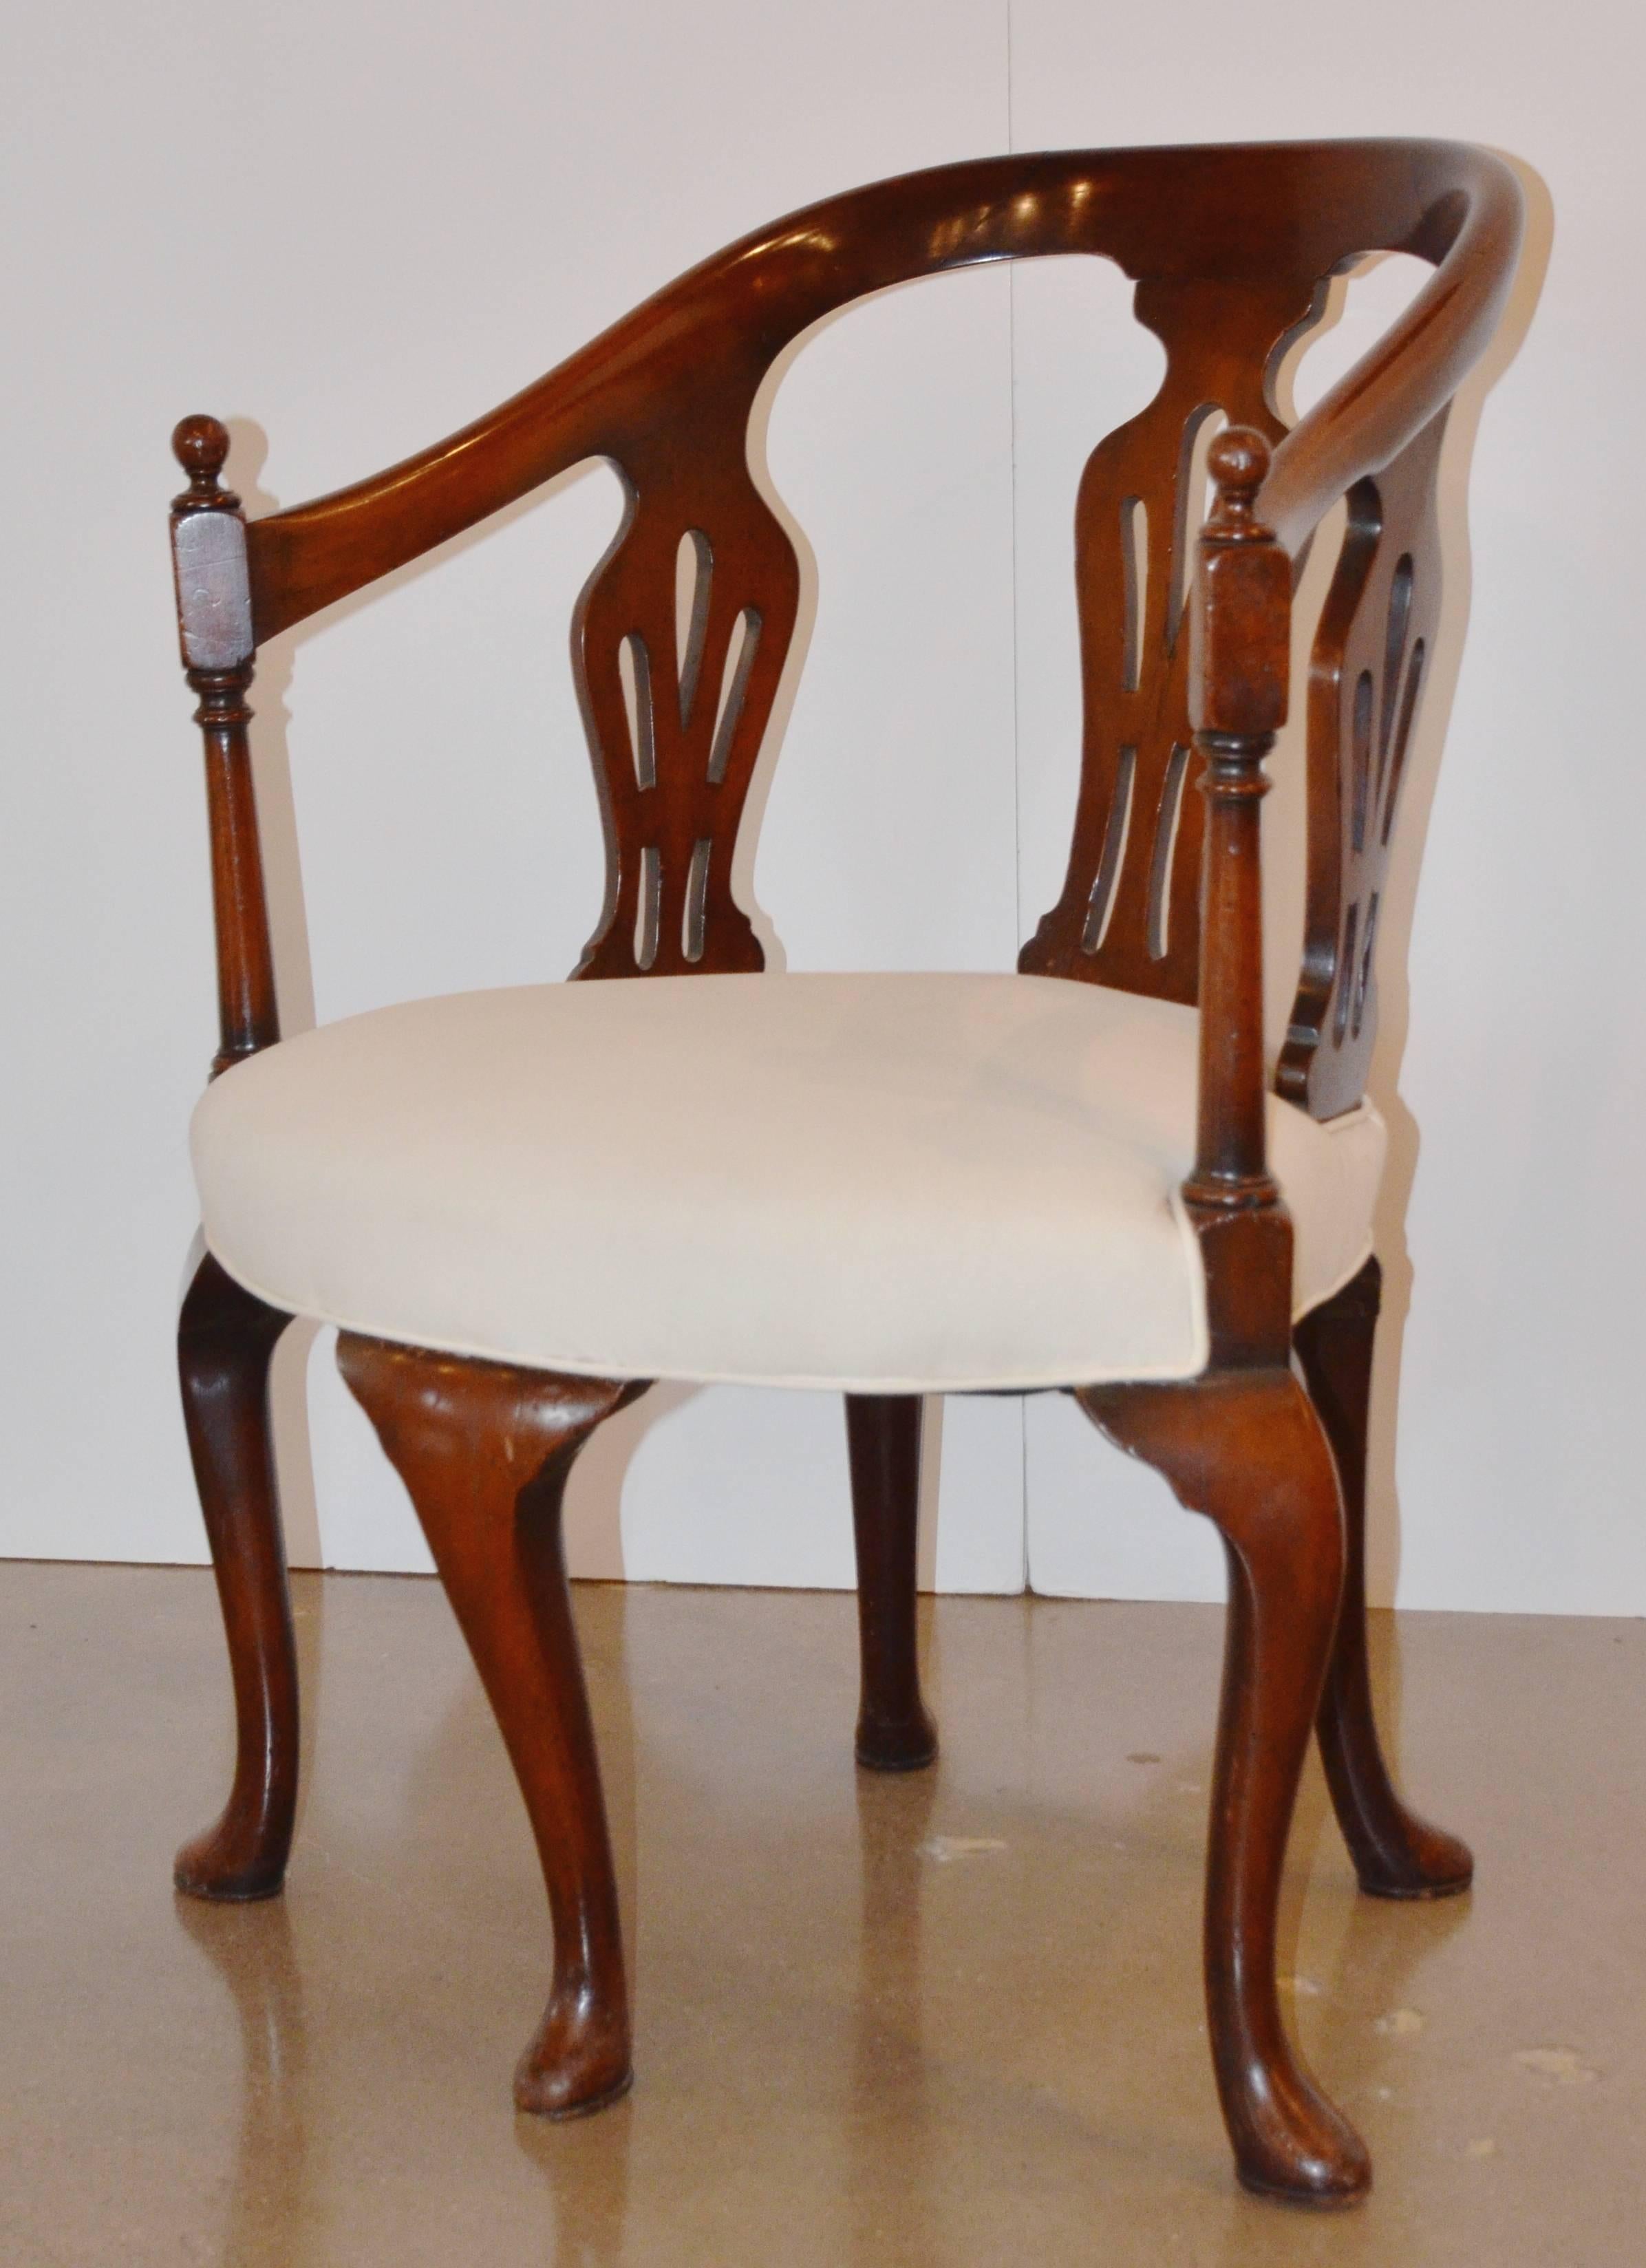 chair with 5 legs